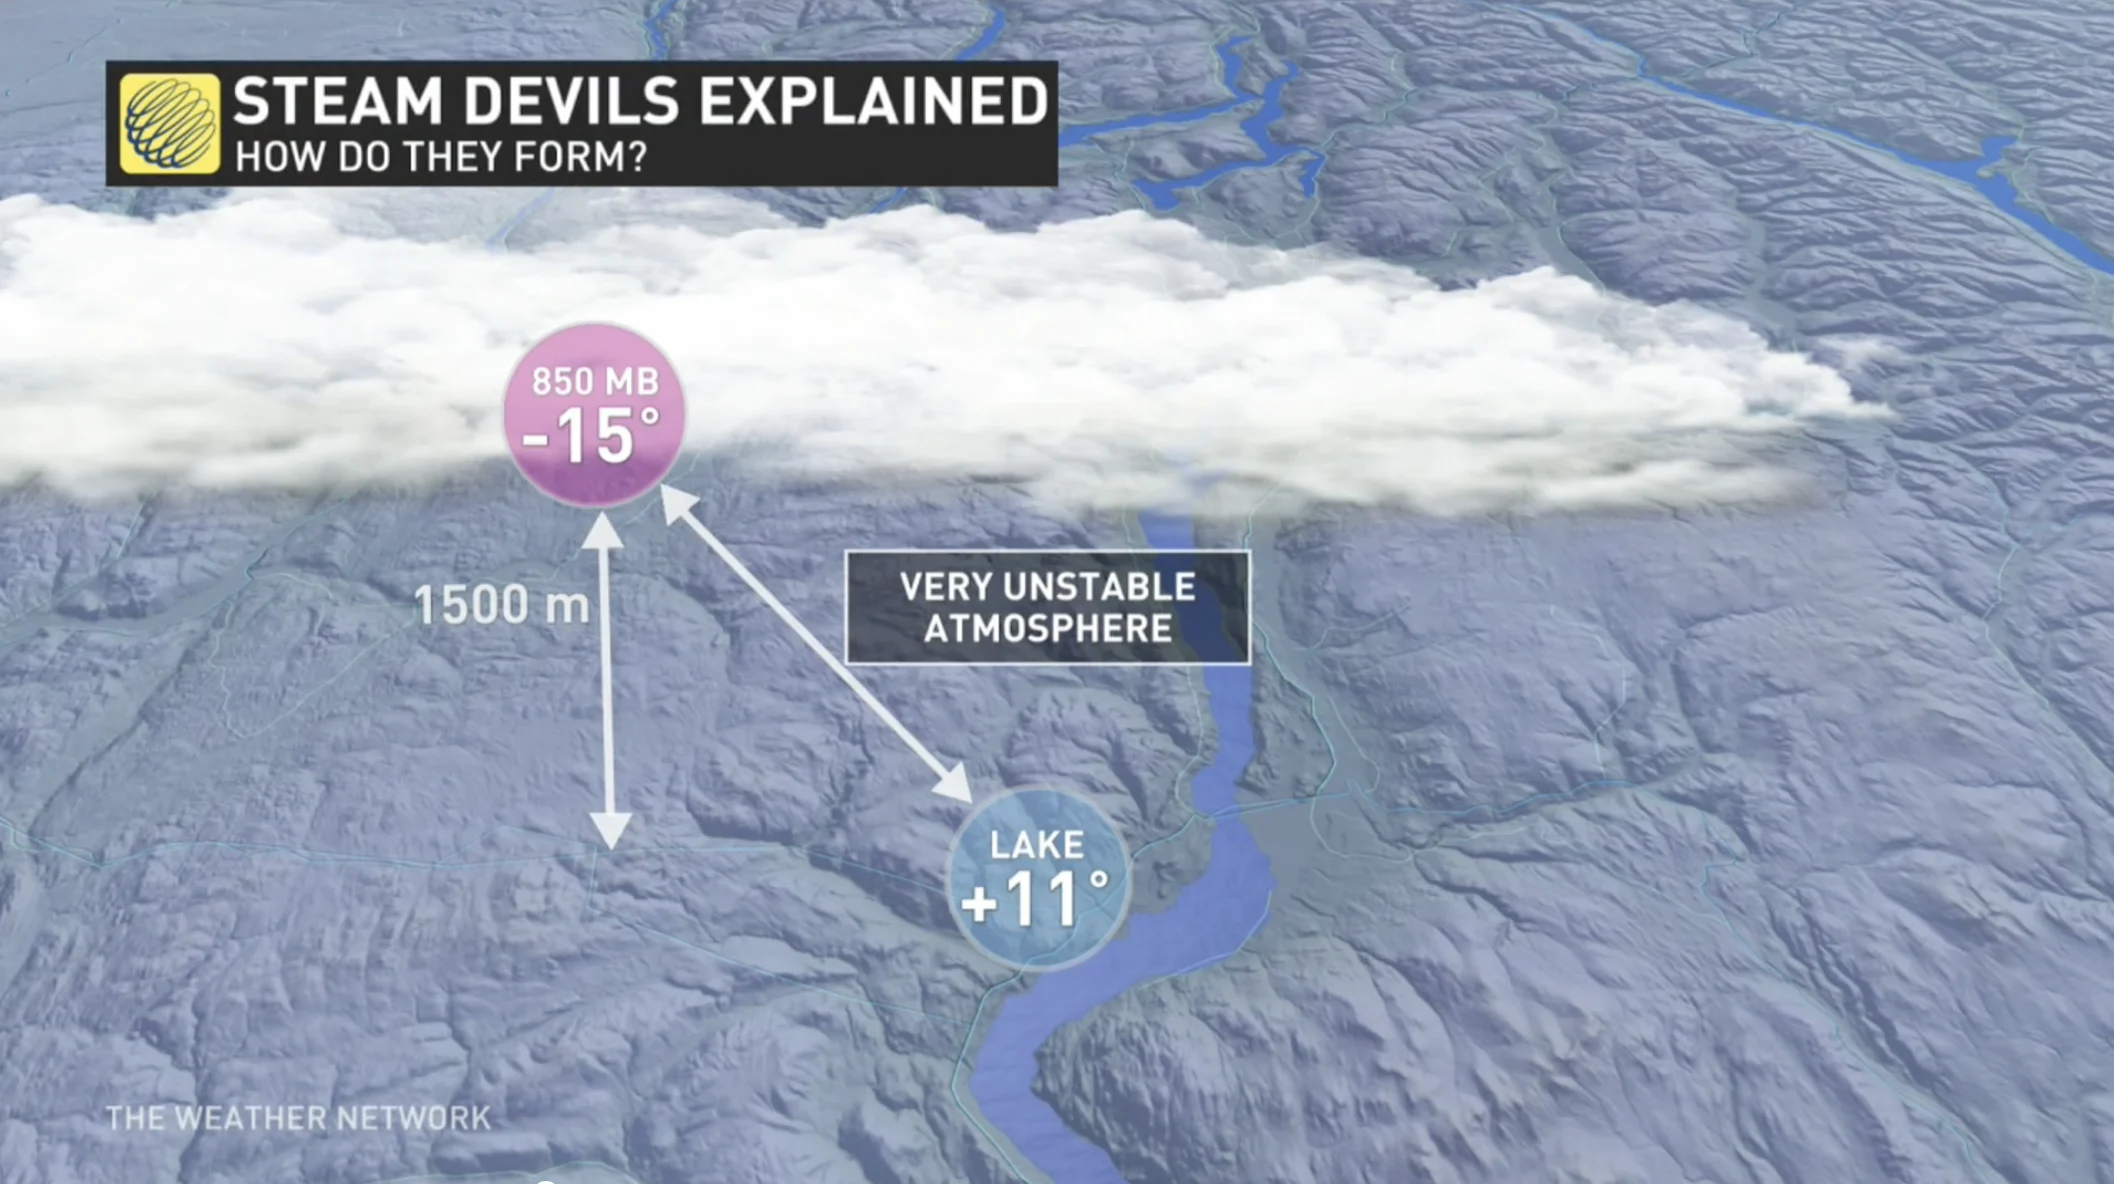 Steam Devil explainer: Warm surface temperatures on water